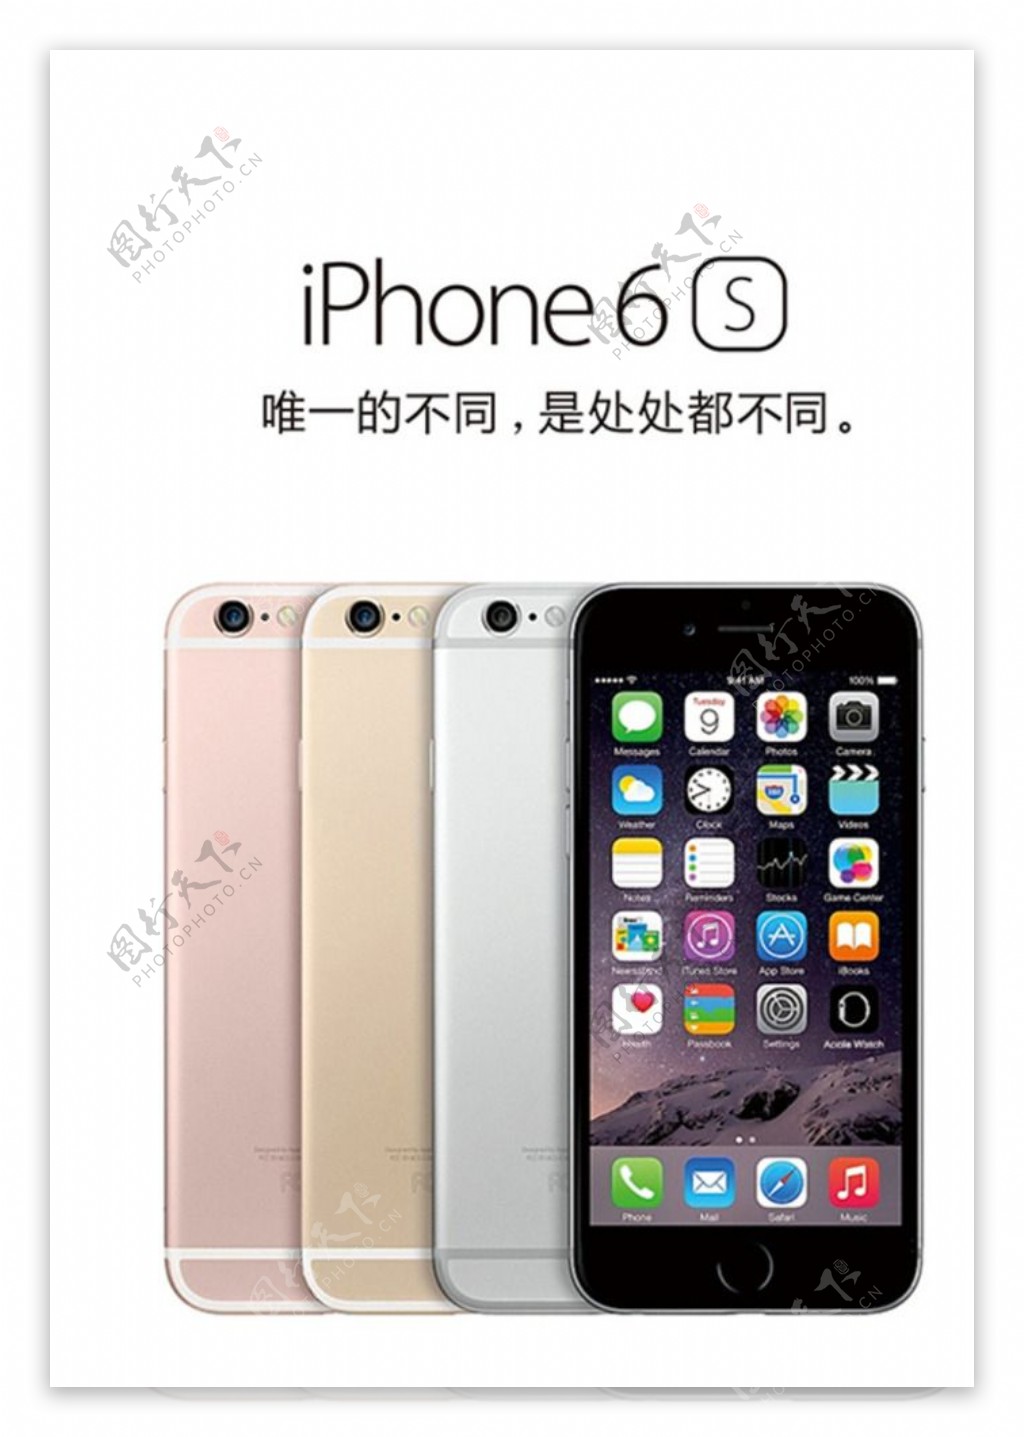 iphone6s苹果手机